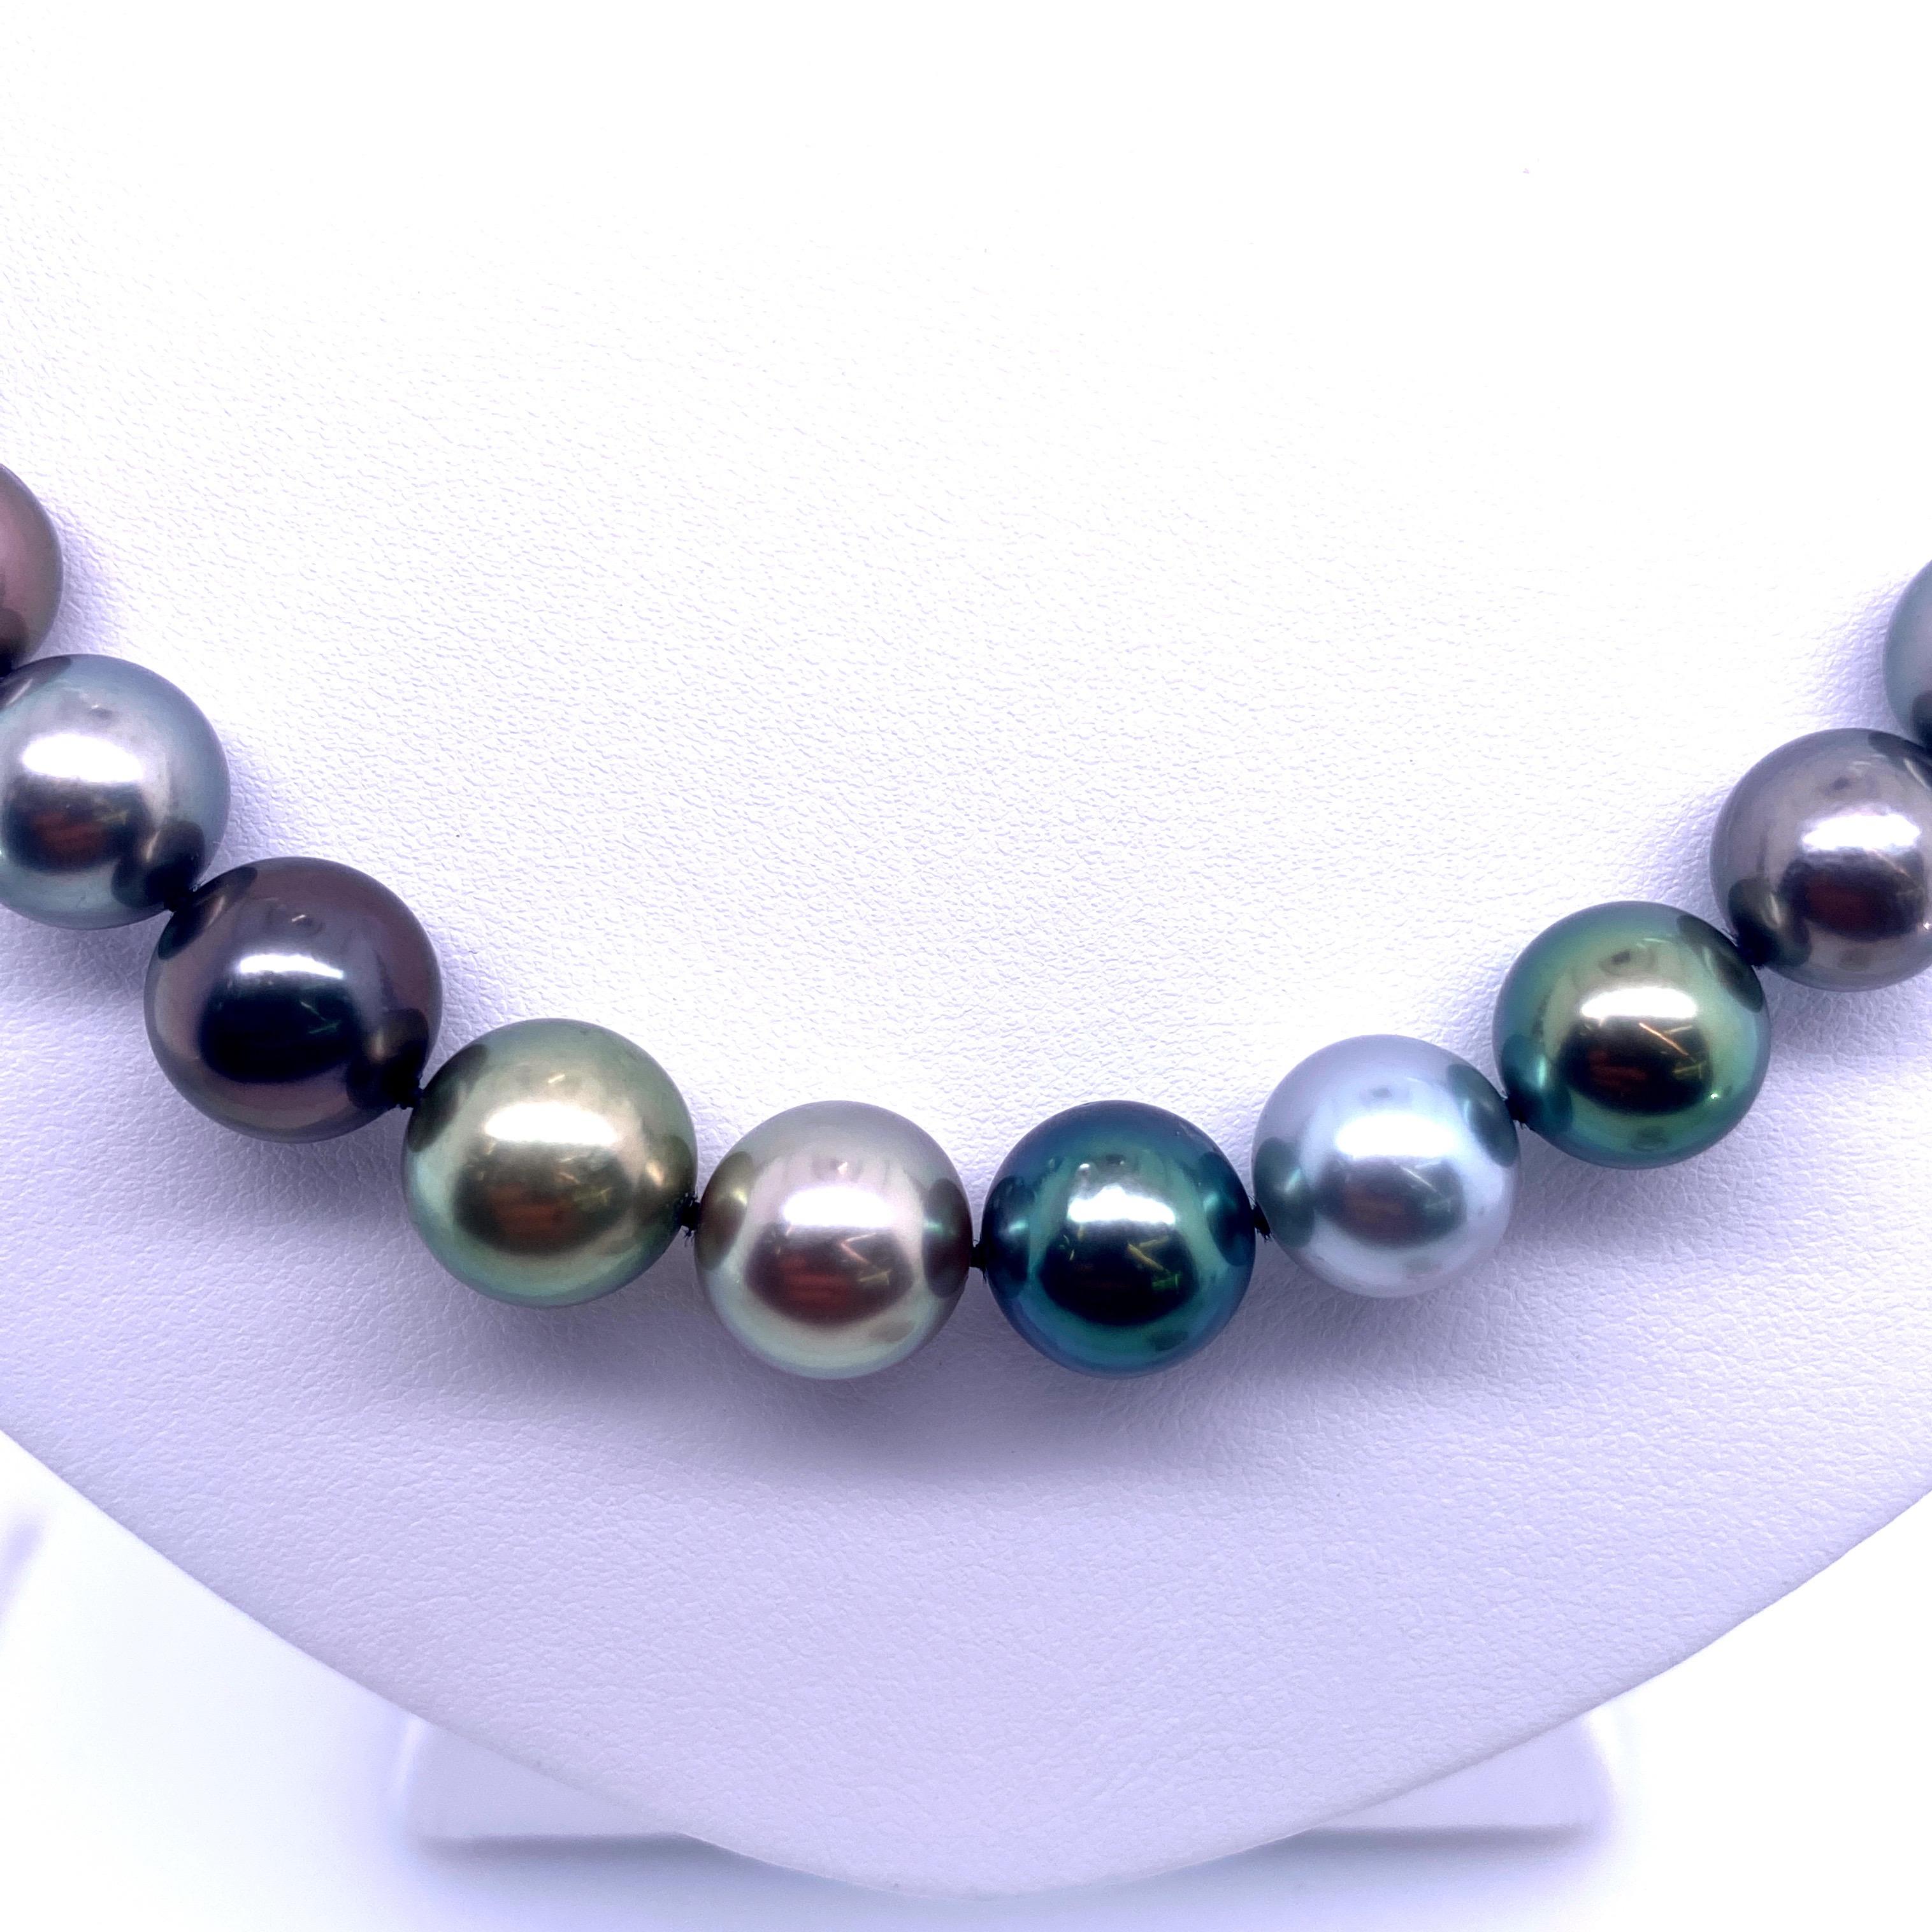 Multi-Color Tahitian pearl strand necklace featuring 41 round pearls from light grey to dark grey colors measuring 9.8-11 MM, with a 14k white gold milgrain ball clasp. 

Pearl quality: AAA
Pearl Luster: AAA Excellent
Nacre : Very Thick

Strand can